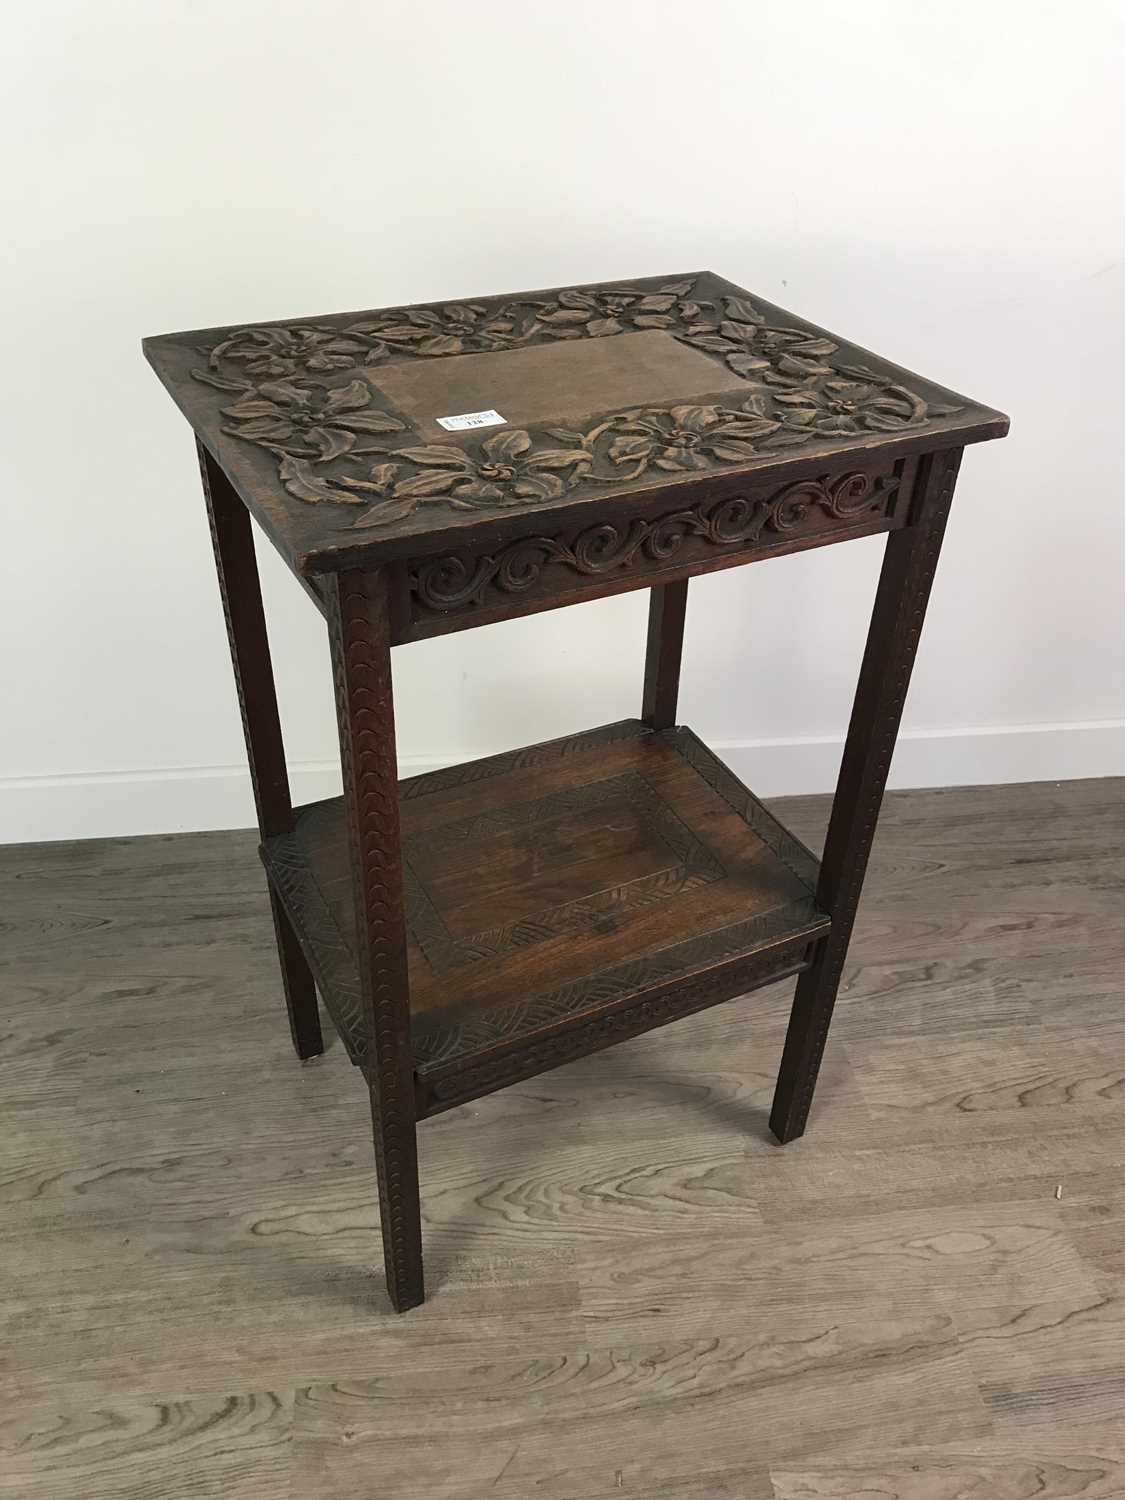 Lot 128 - A LATE 19TH CENTURY CARVED WOOD OCCASIONAL TABLE